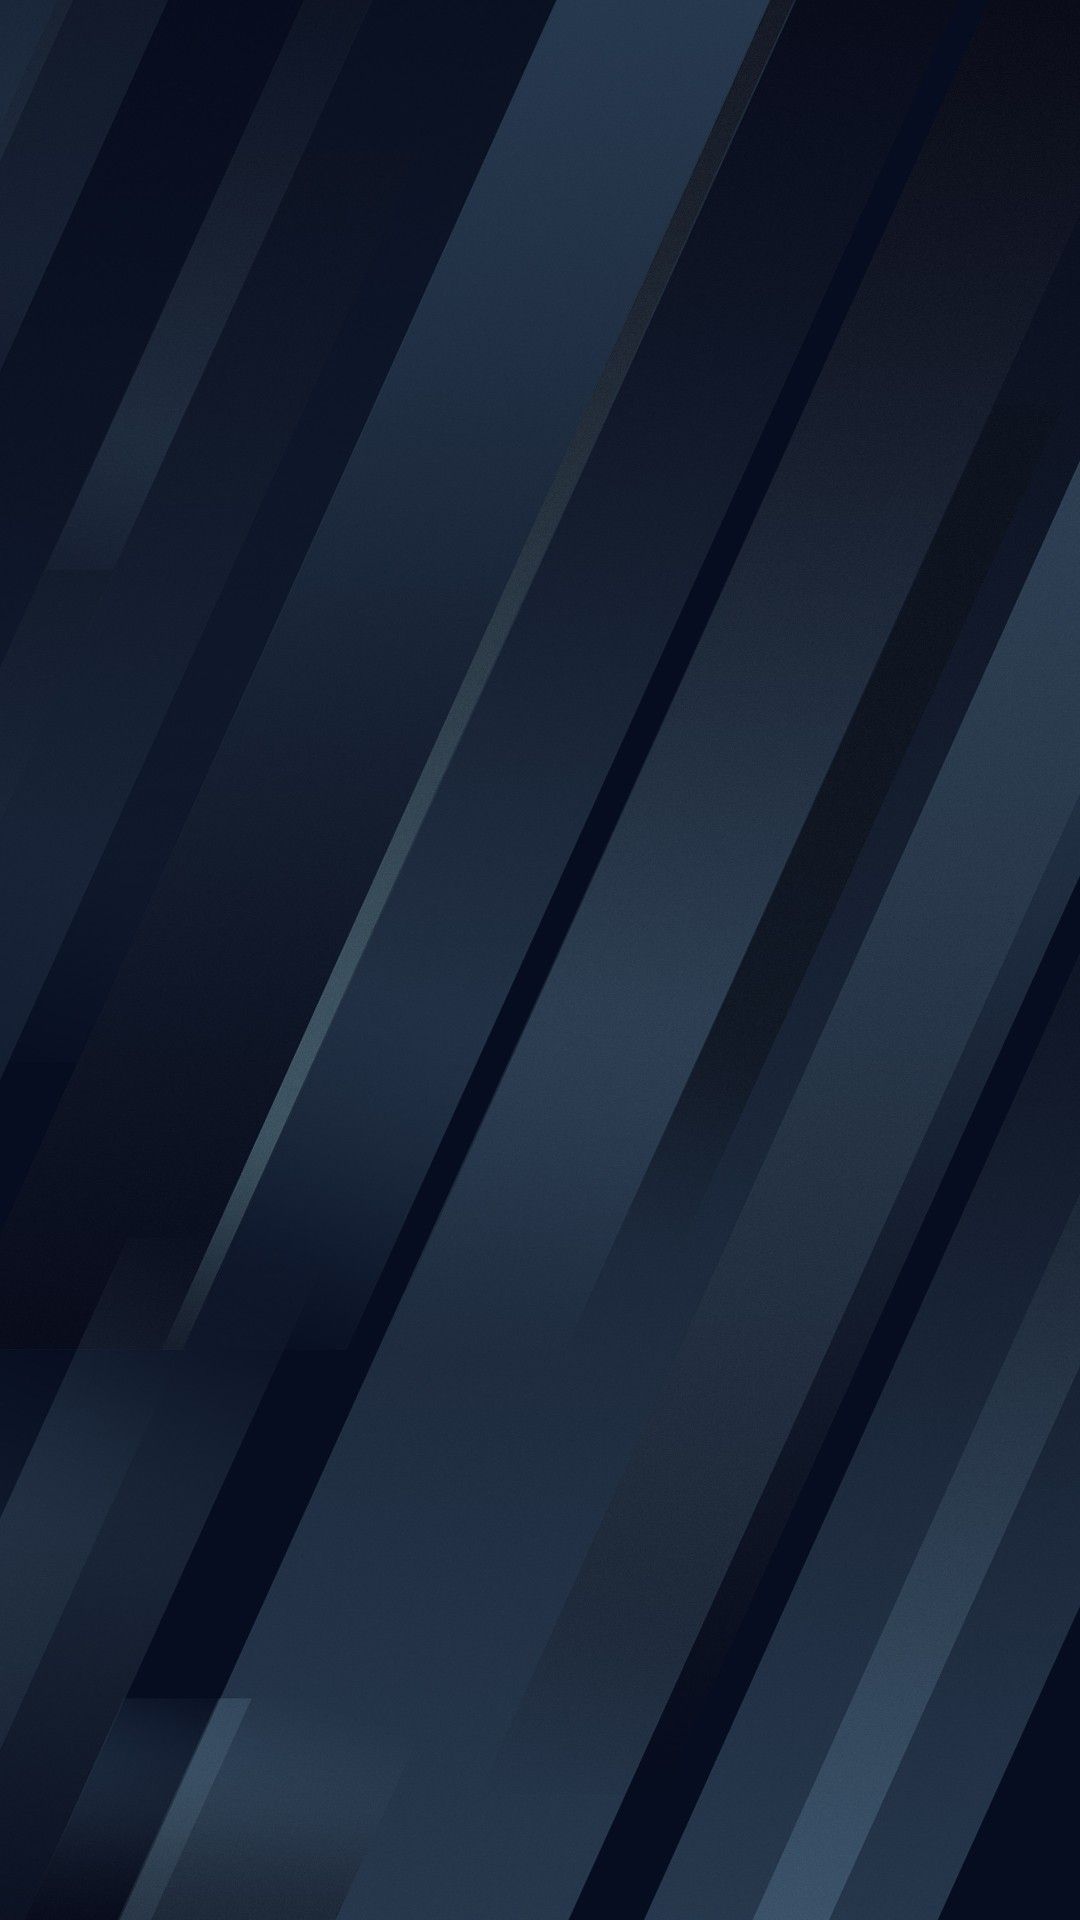 Navy Blue Wallpaper. Geometric wallpaper iphone, White background image, Abstract wallpaper background